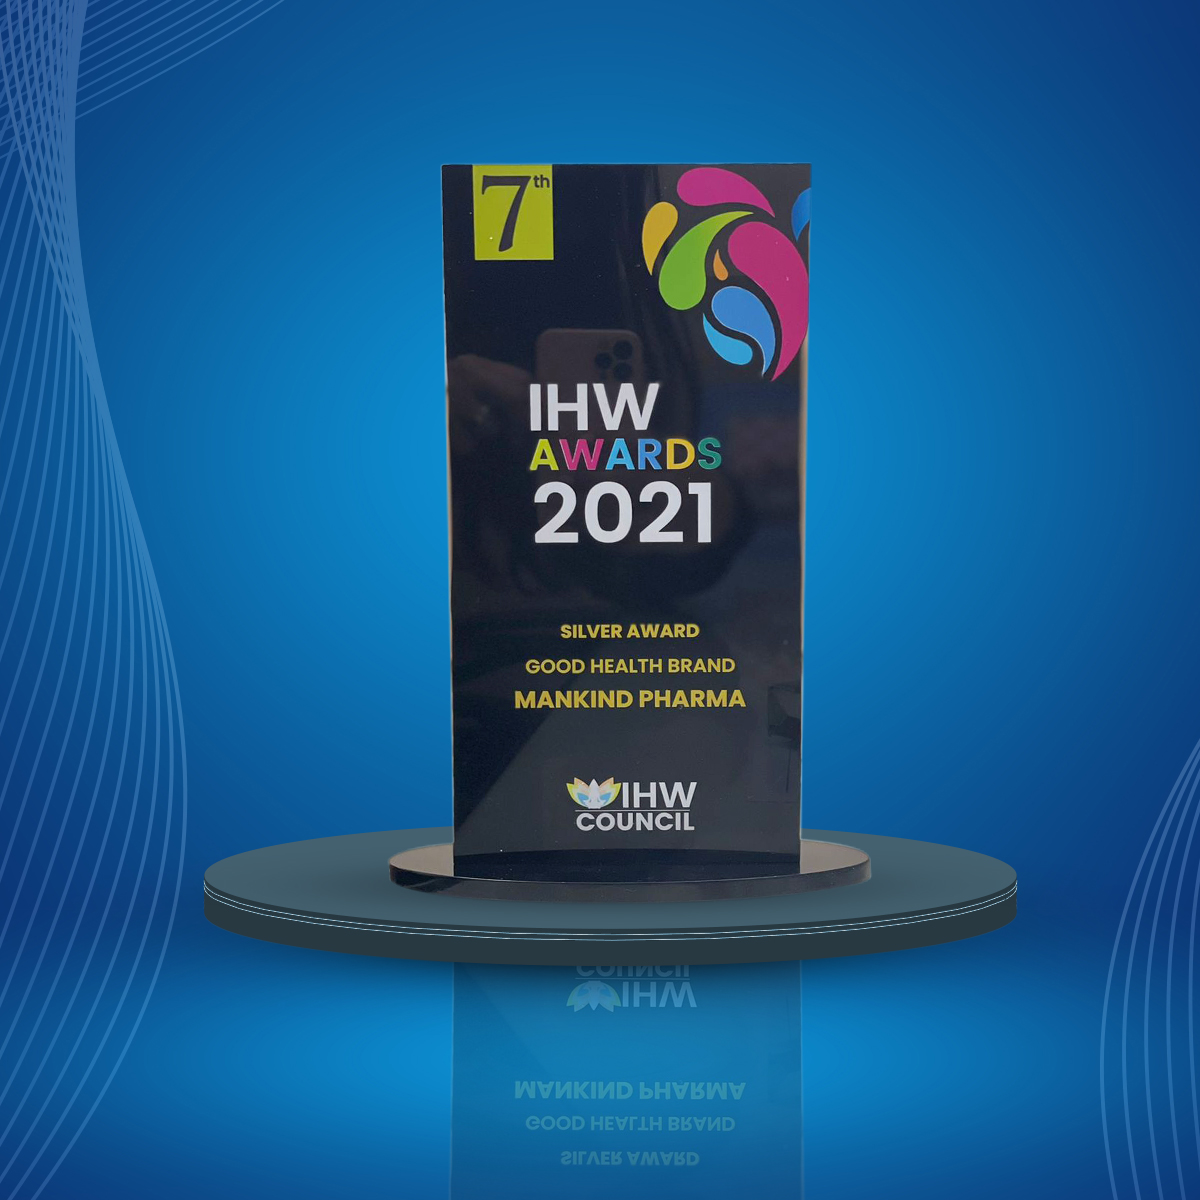 Silver Award for Good Health Brand by IHW Awards 2021